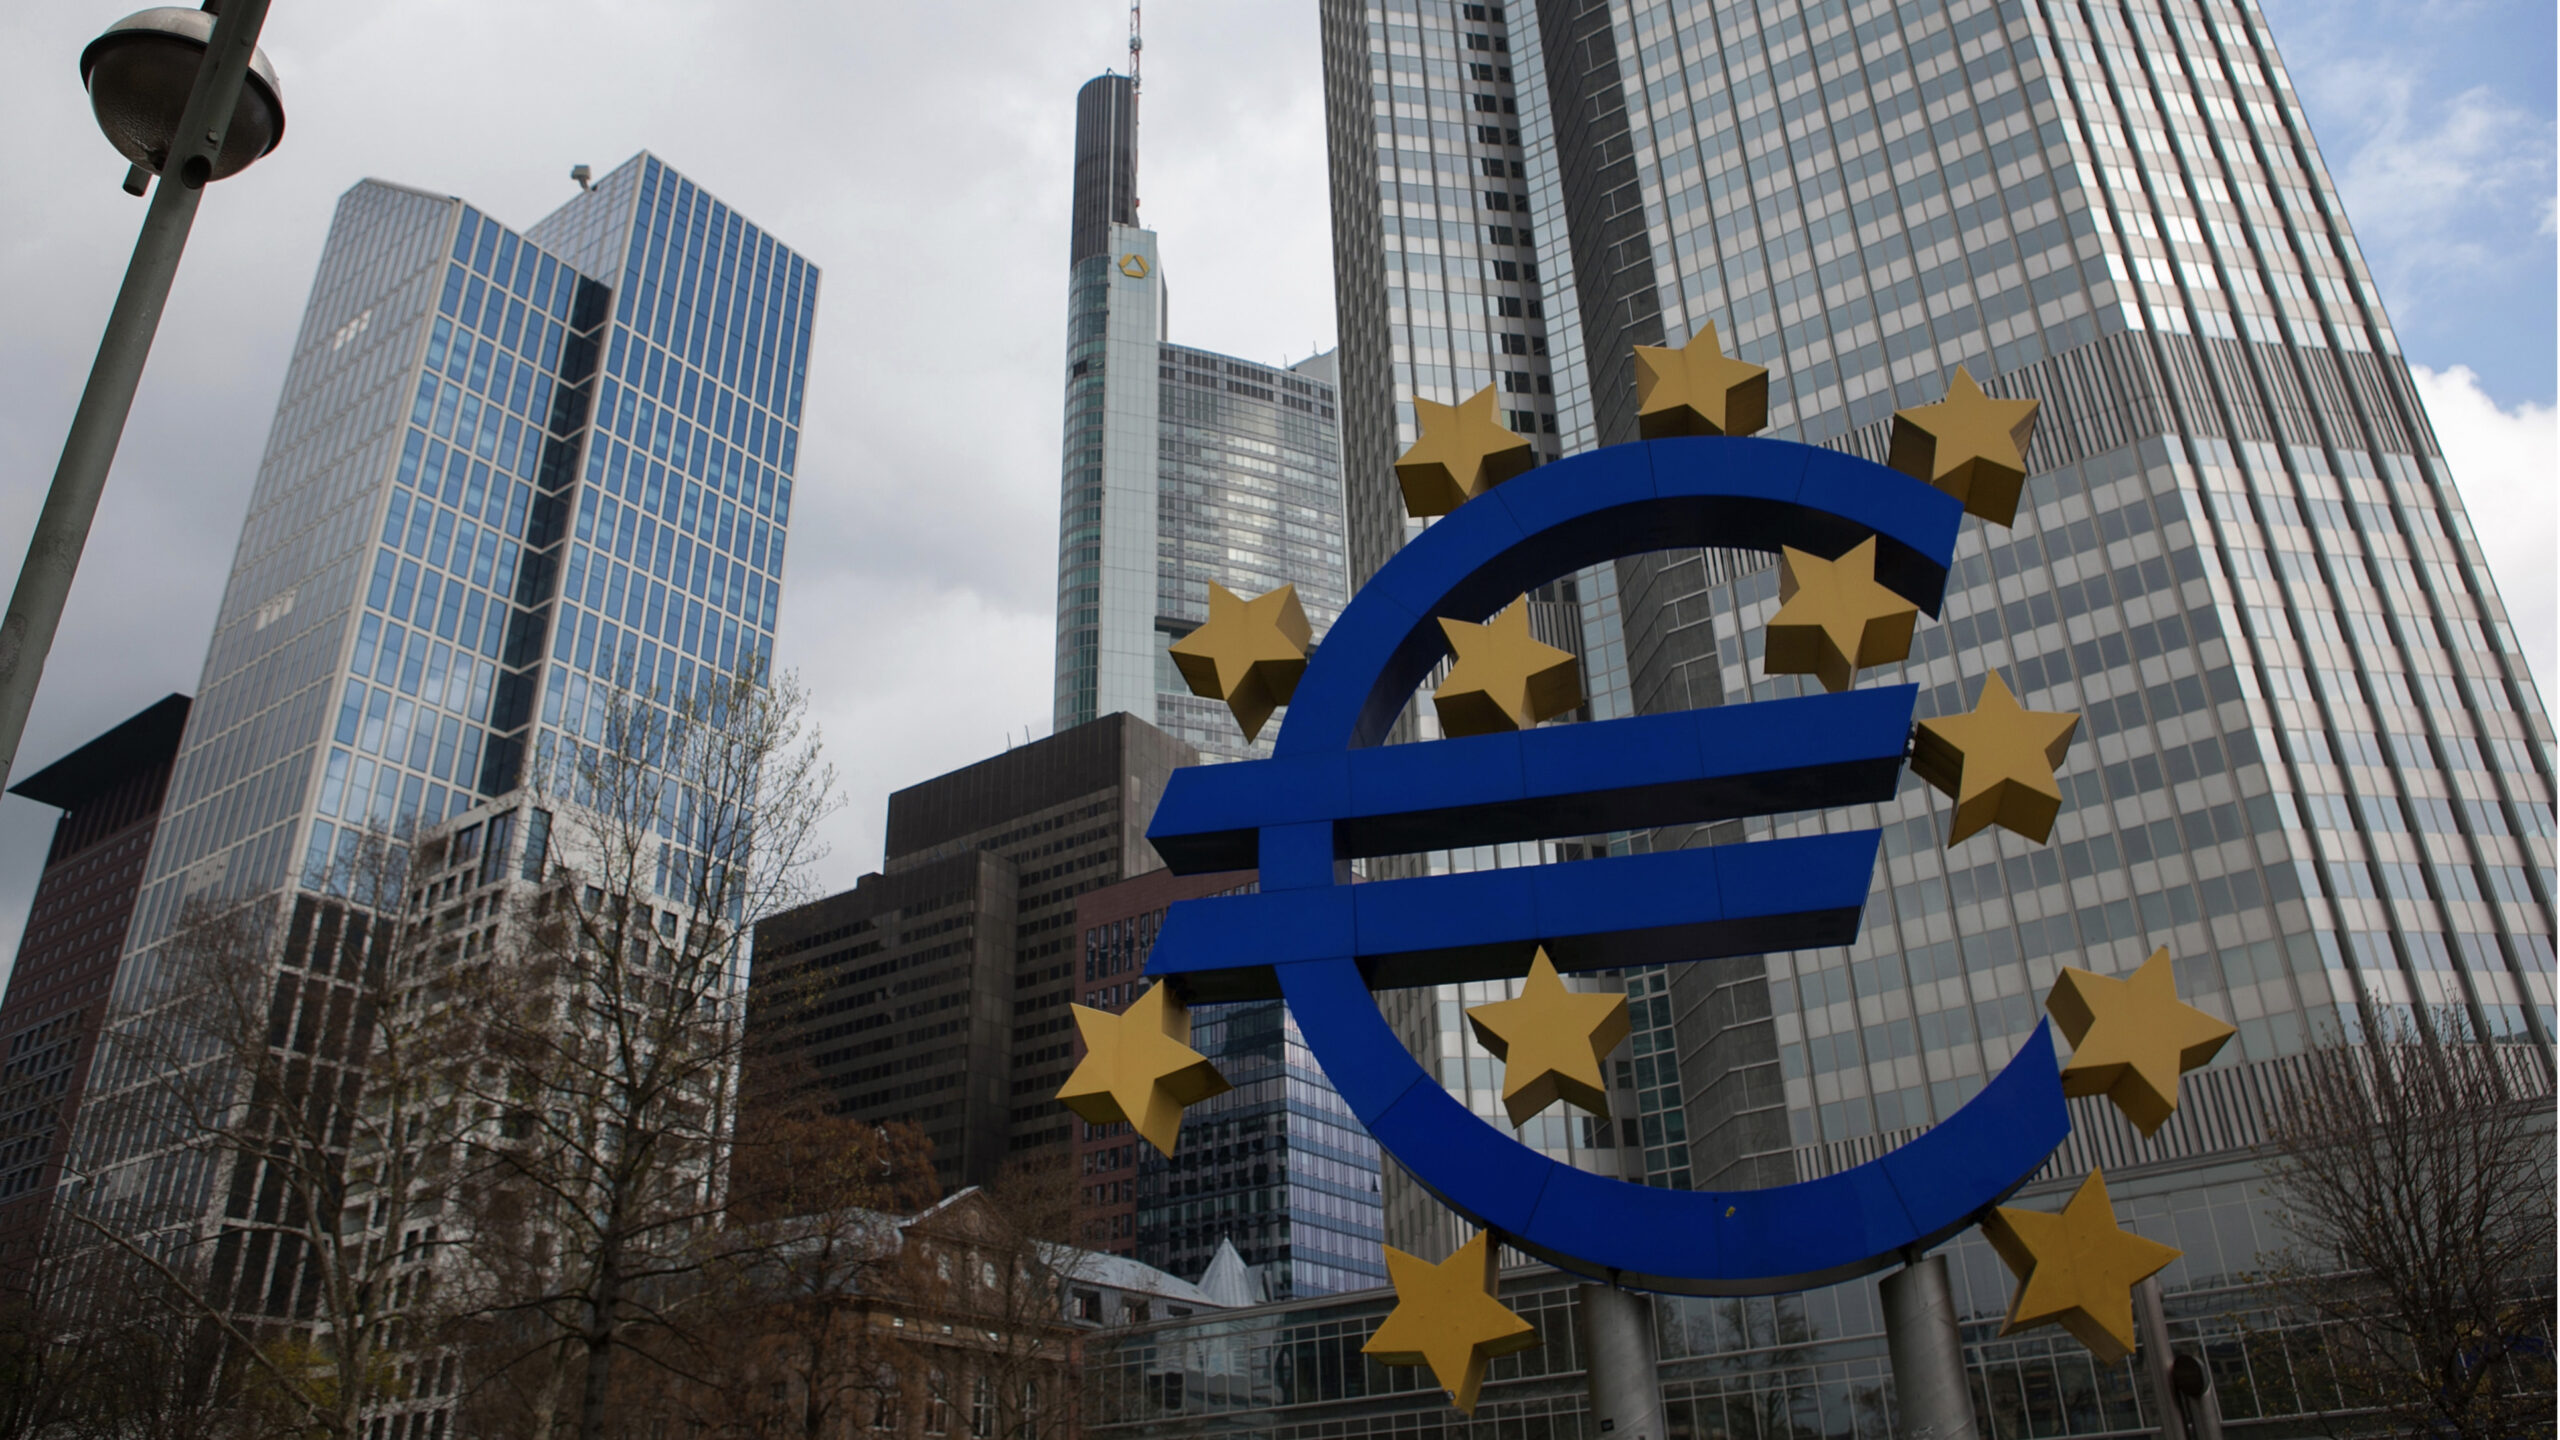 Reclaim Finance has suggested that the European Central Bank, pictured, could set a lower rate for financing green activities, beginning with sustainable energy (Krisztian Bocsi/Bloomberg) 